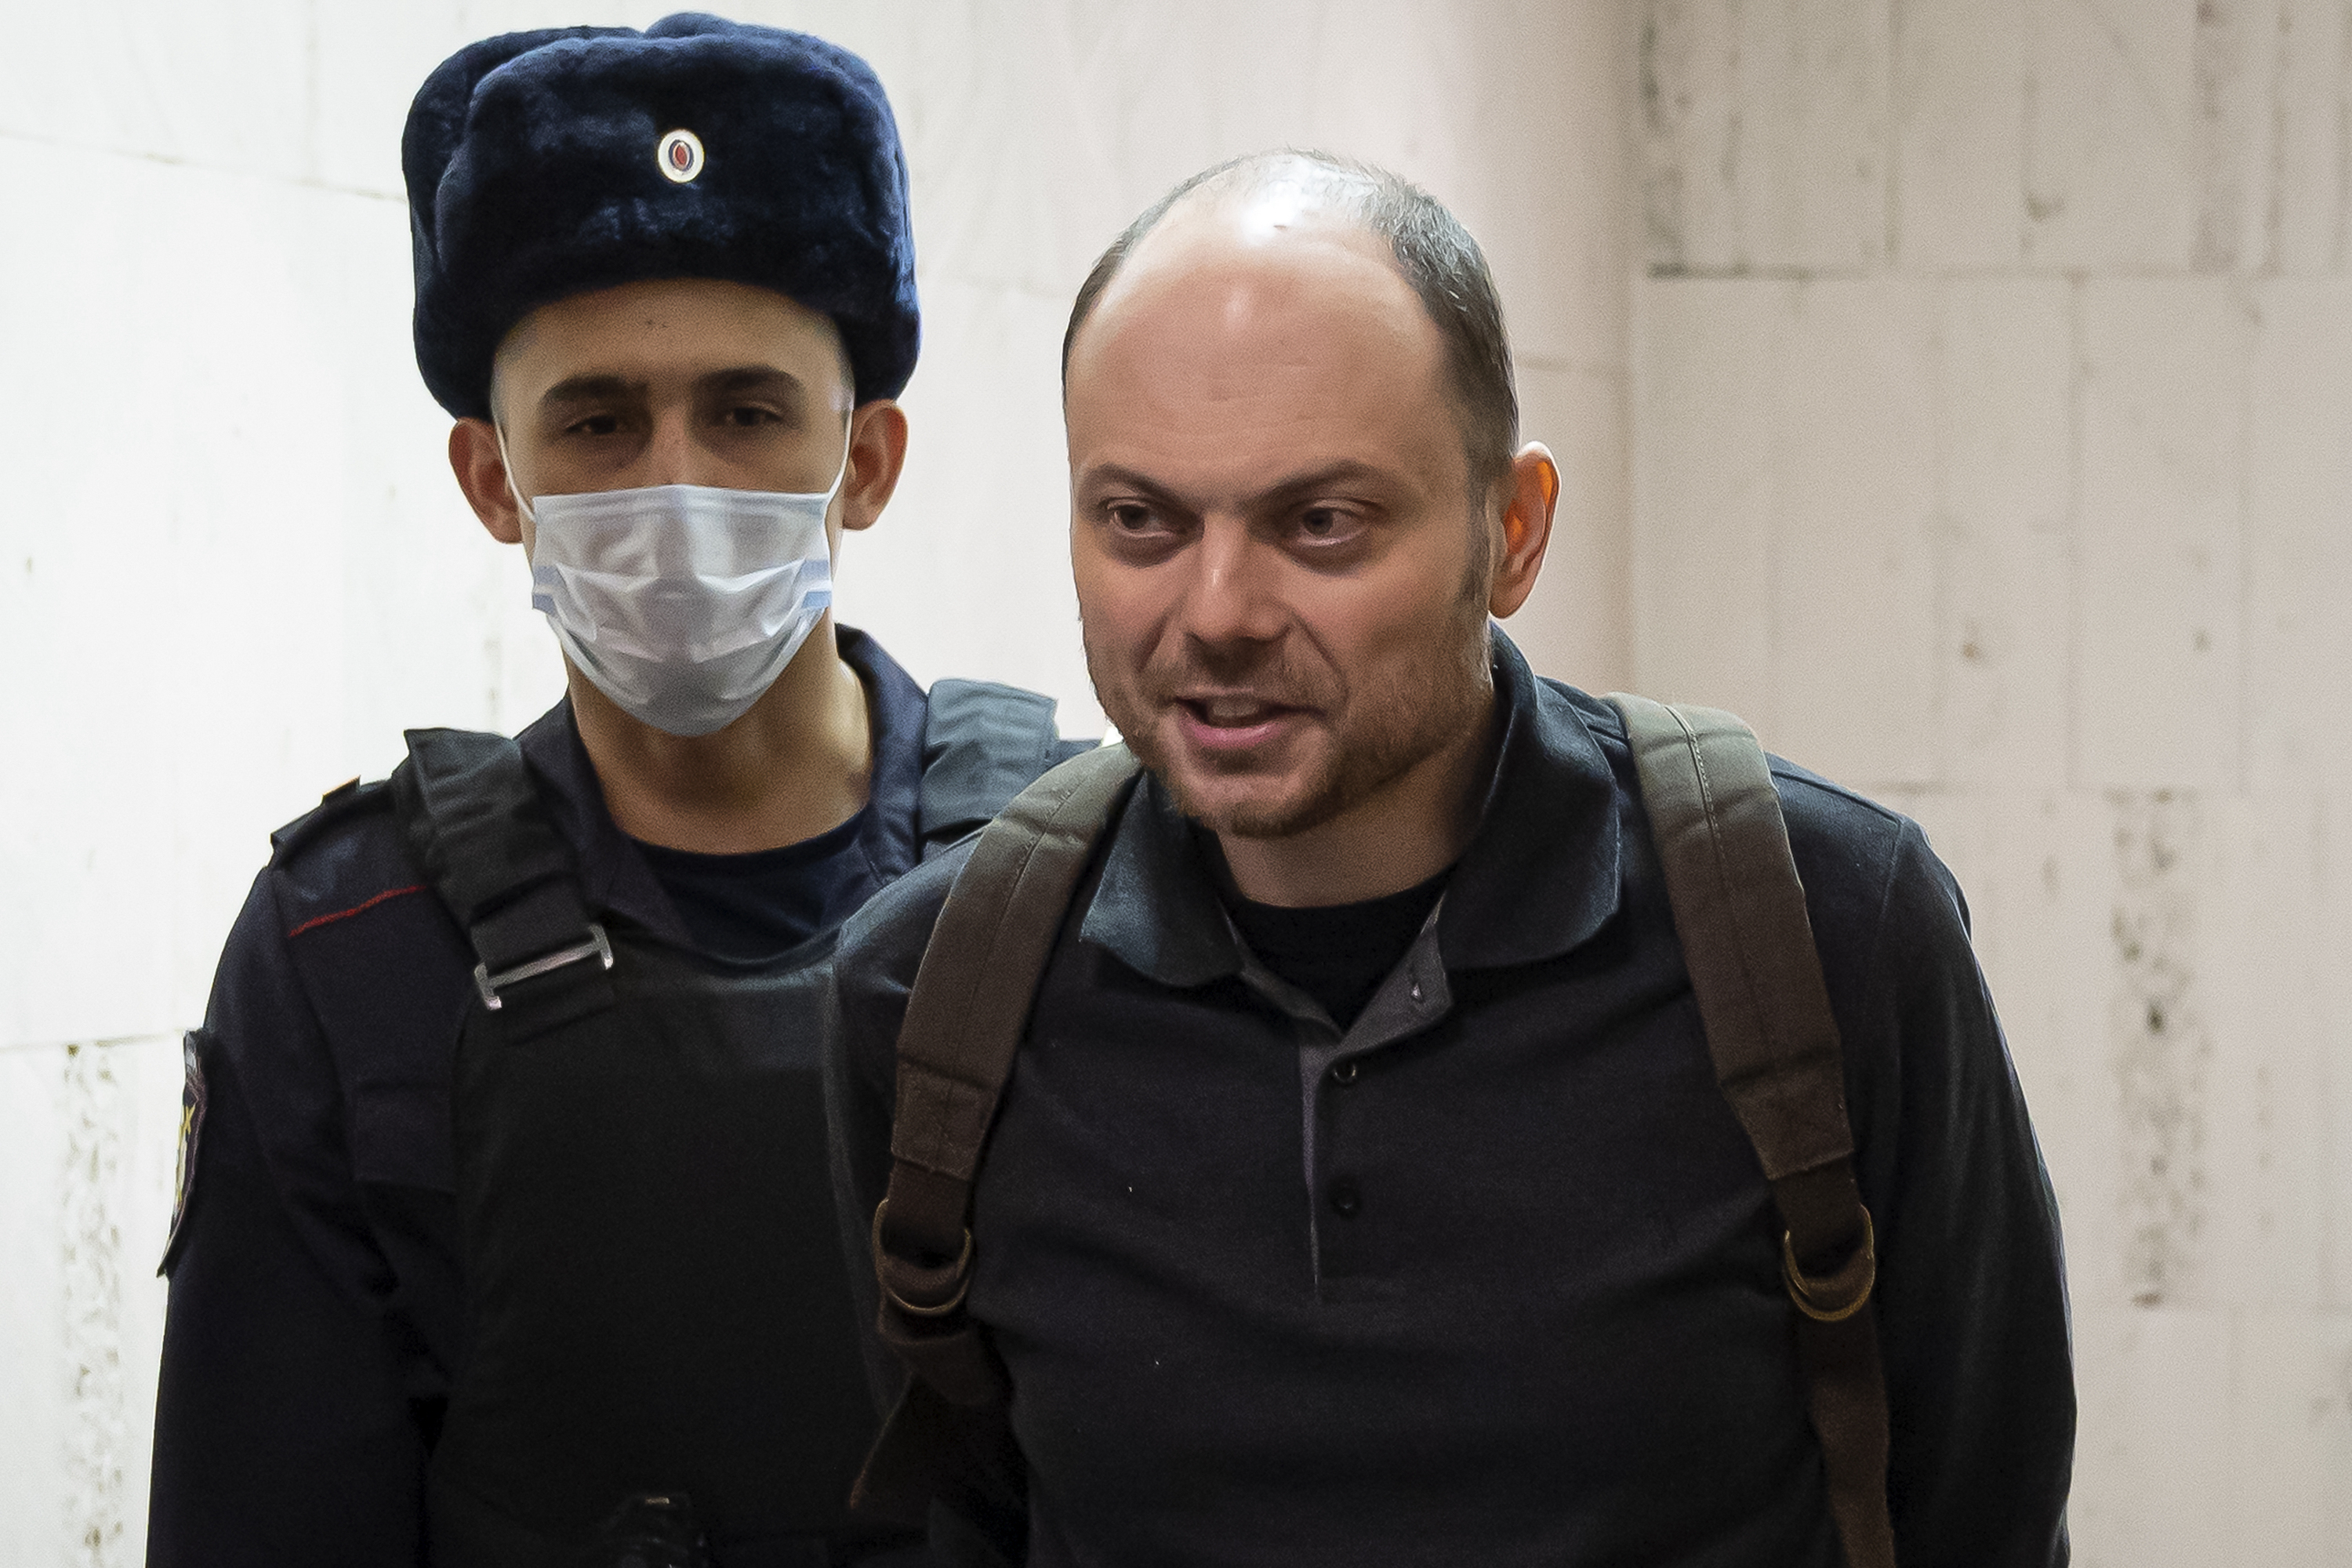 Russian opposition politician Vladimir Kara-Murza is escorted to a hearing in a court in Moscow, Russia, February 8, 2023.